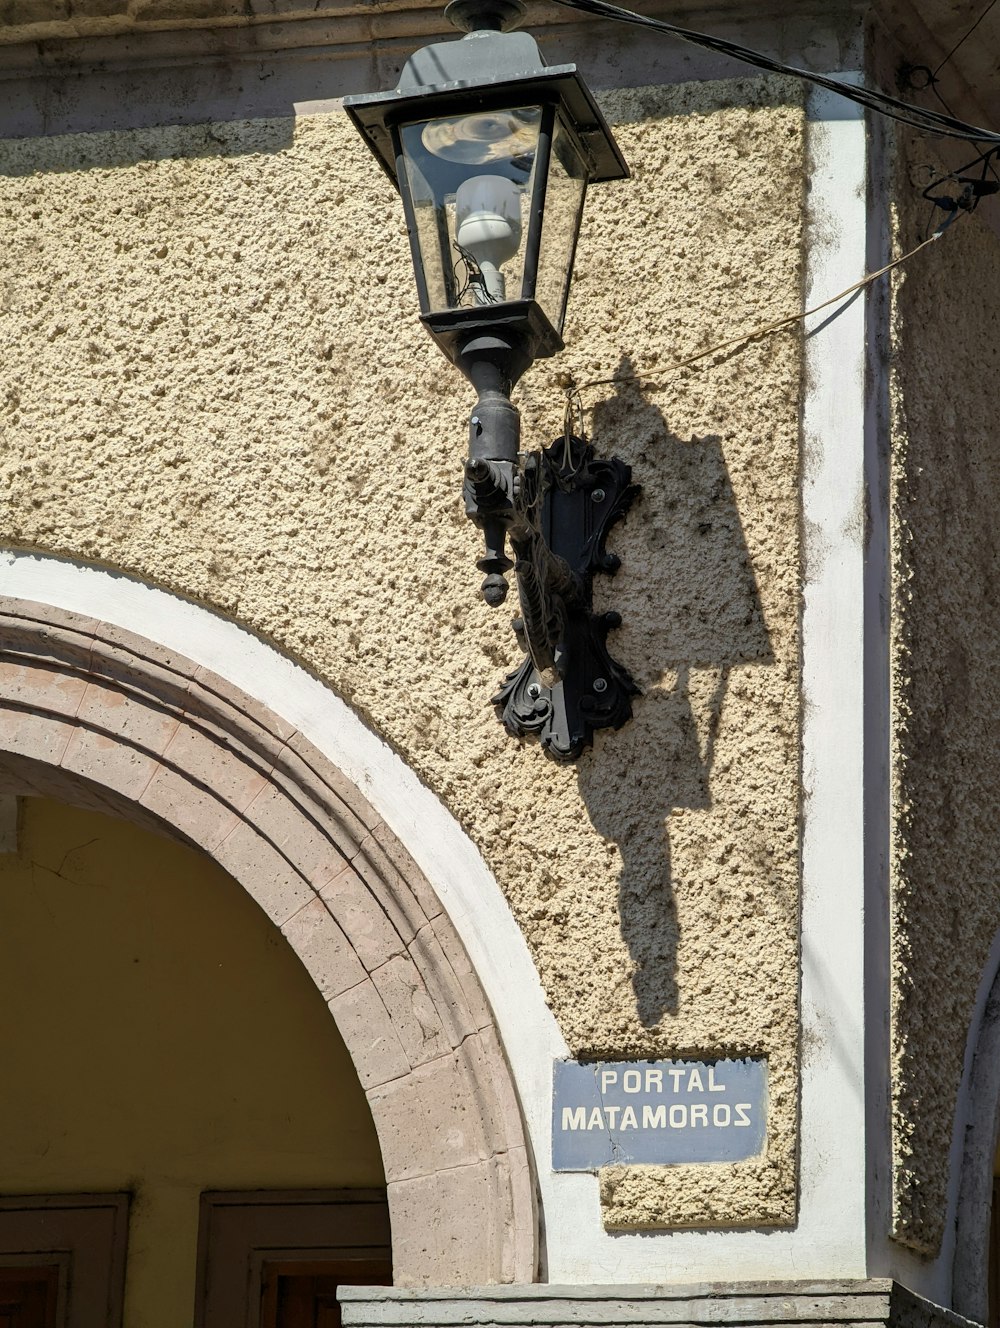 a street light mounted to the side of a building